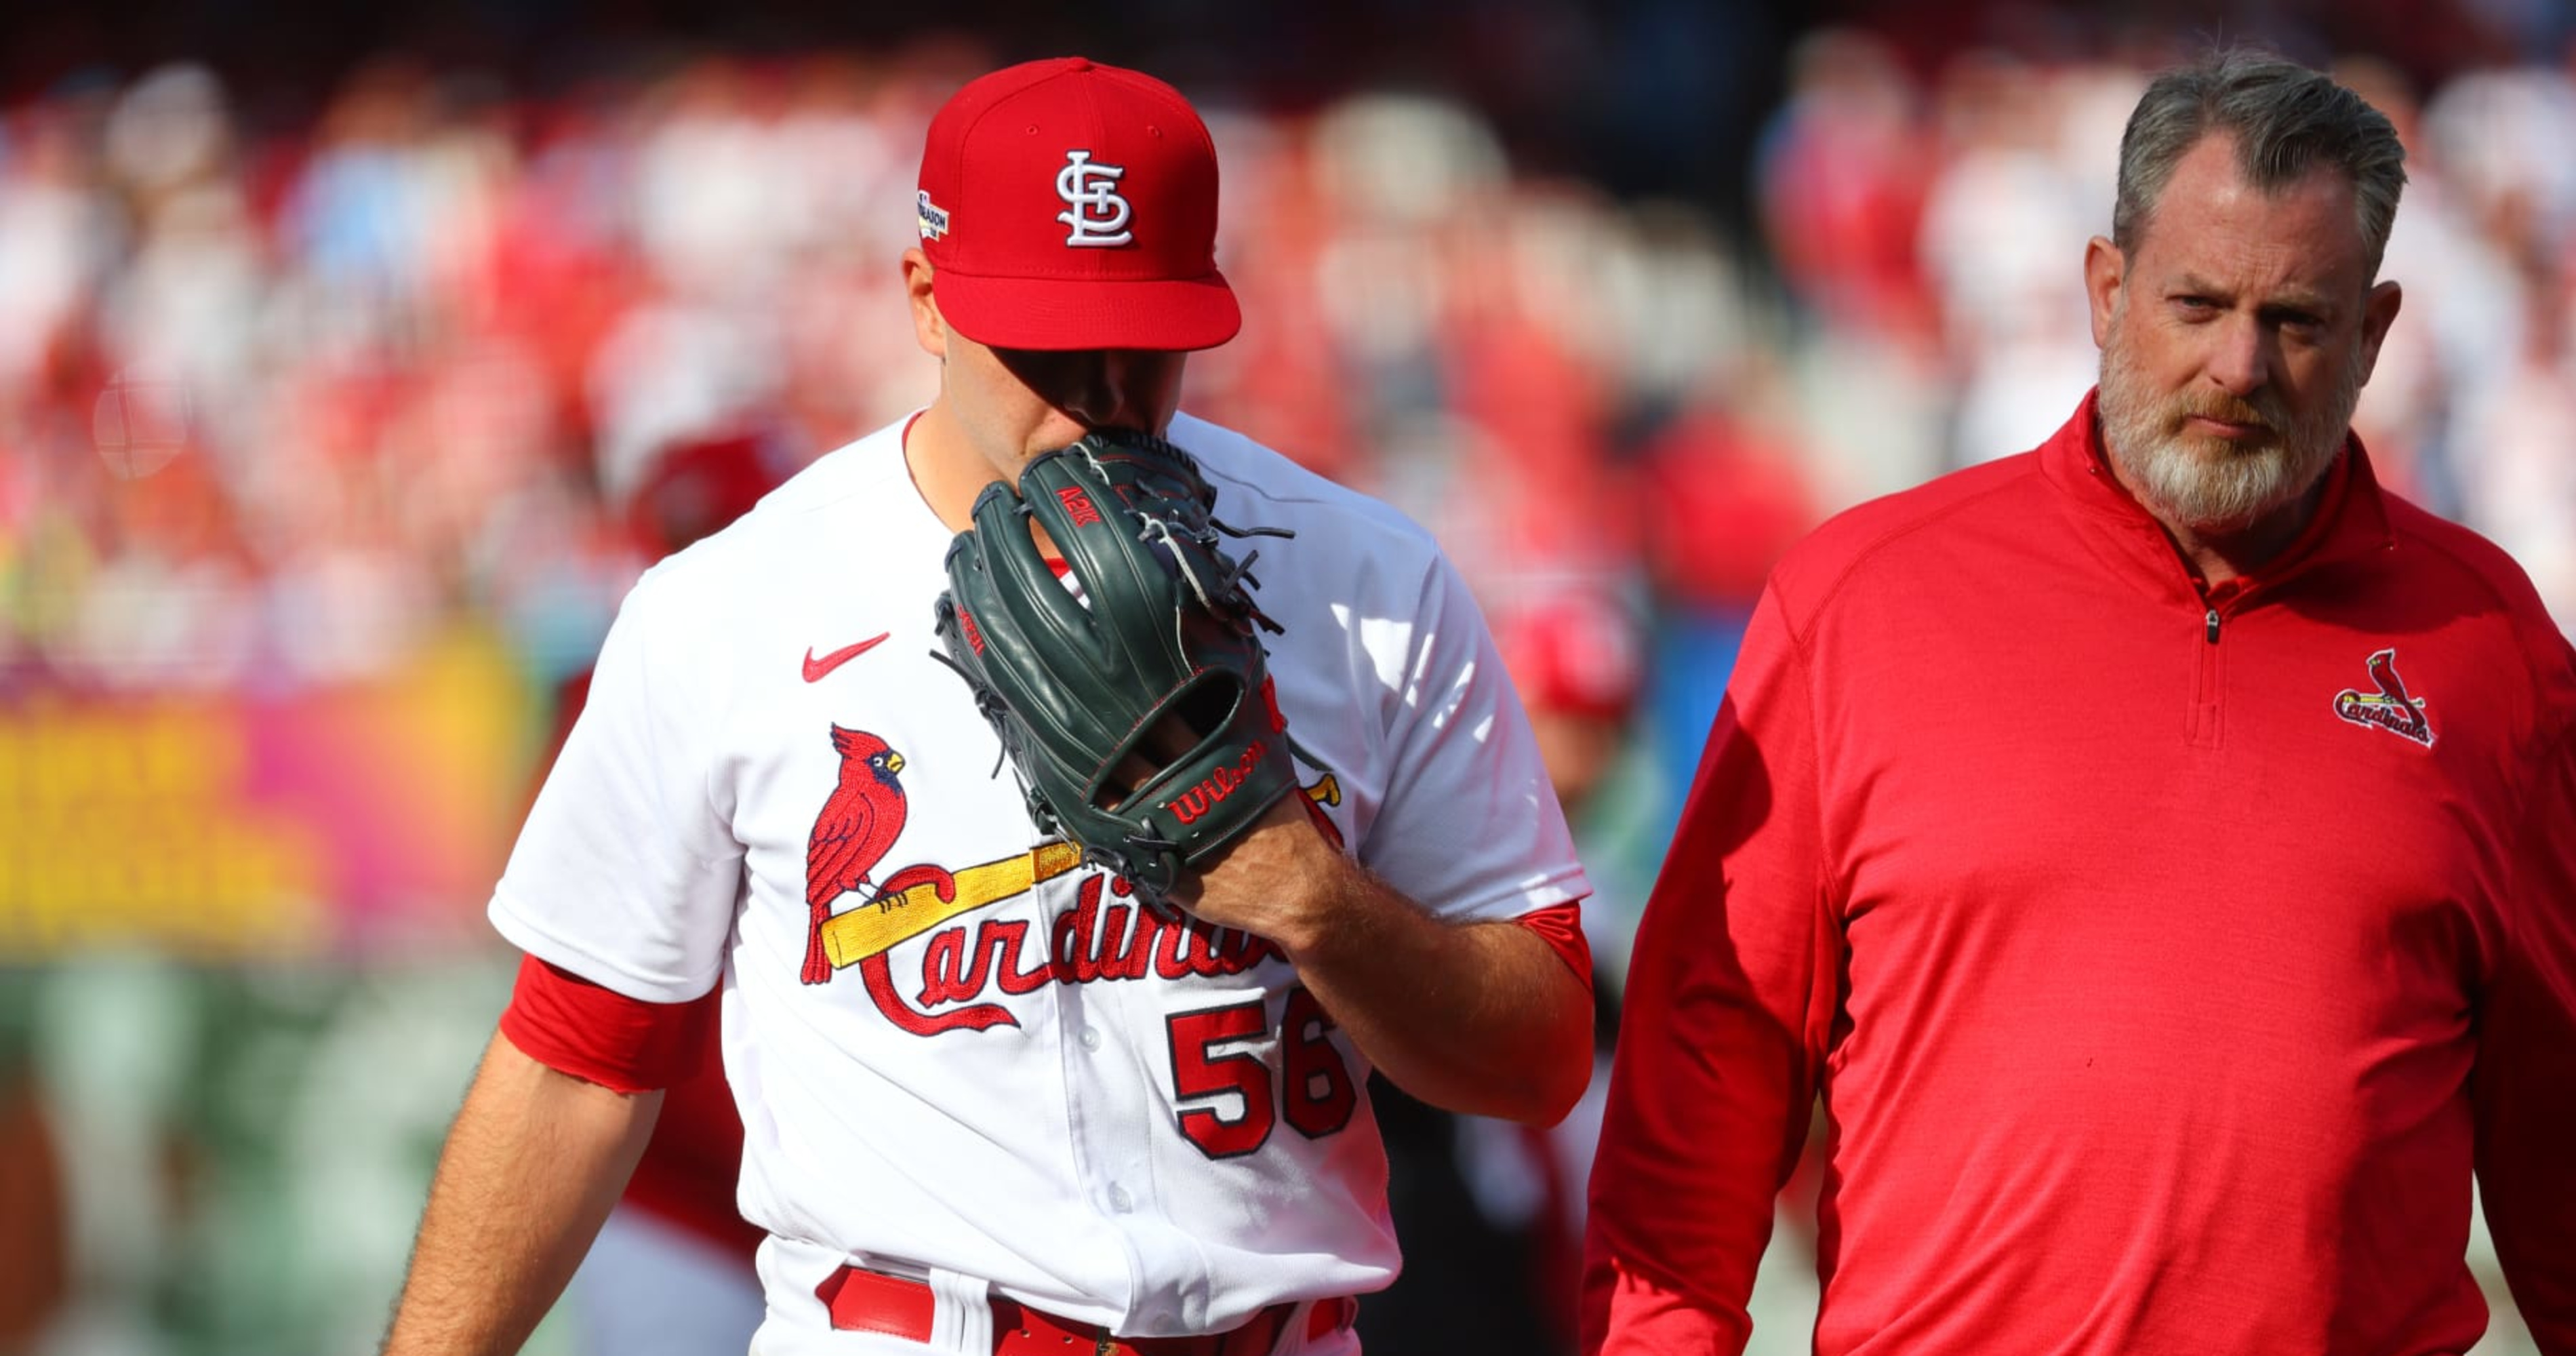 MLB Playoffs Recap: Day One Sees the Cardinals Blow It, Mets Get